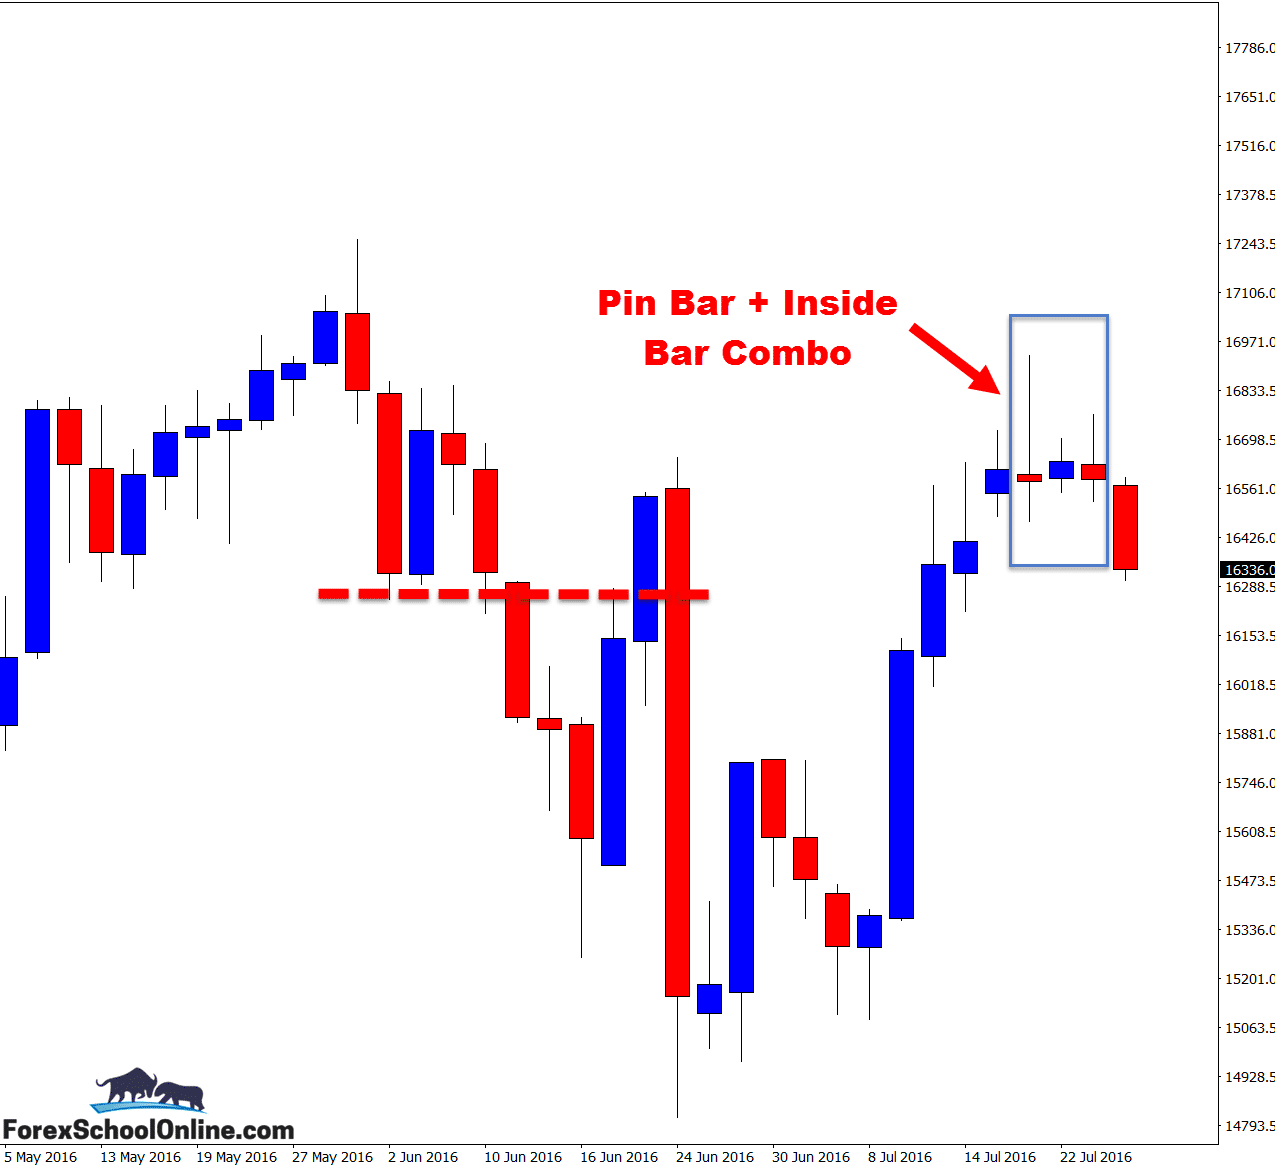 Pin bar rejection